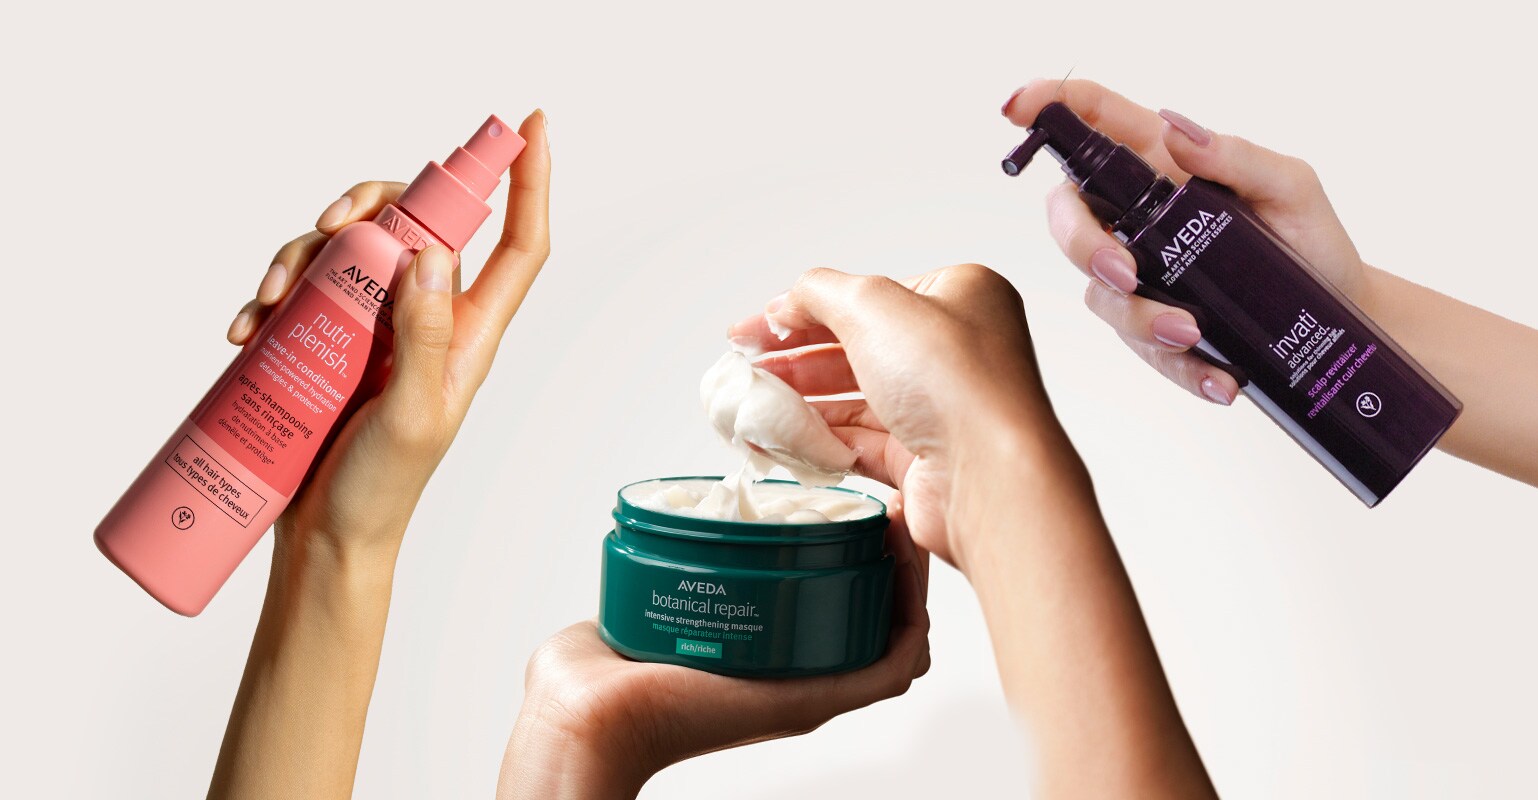 sets of hands holding aveda best sellers such as leave in conditioner, rich masque, and scalp revitalizer.